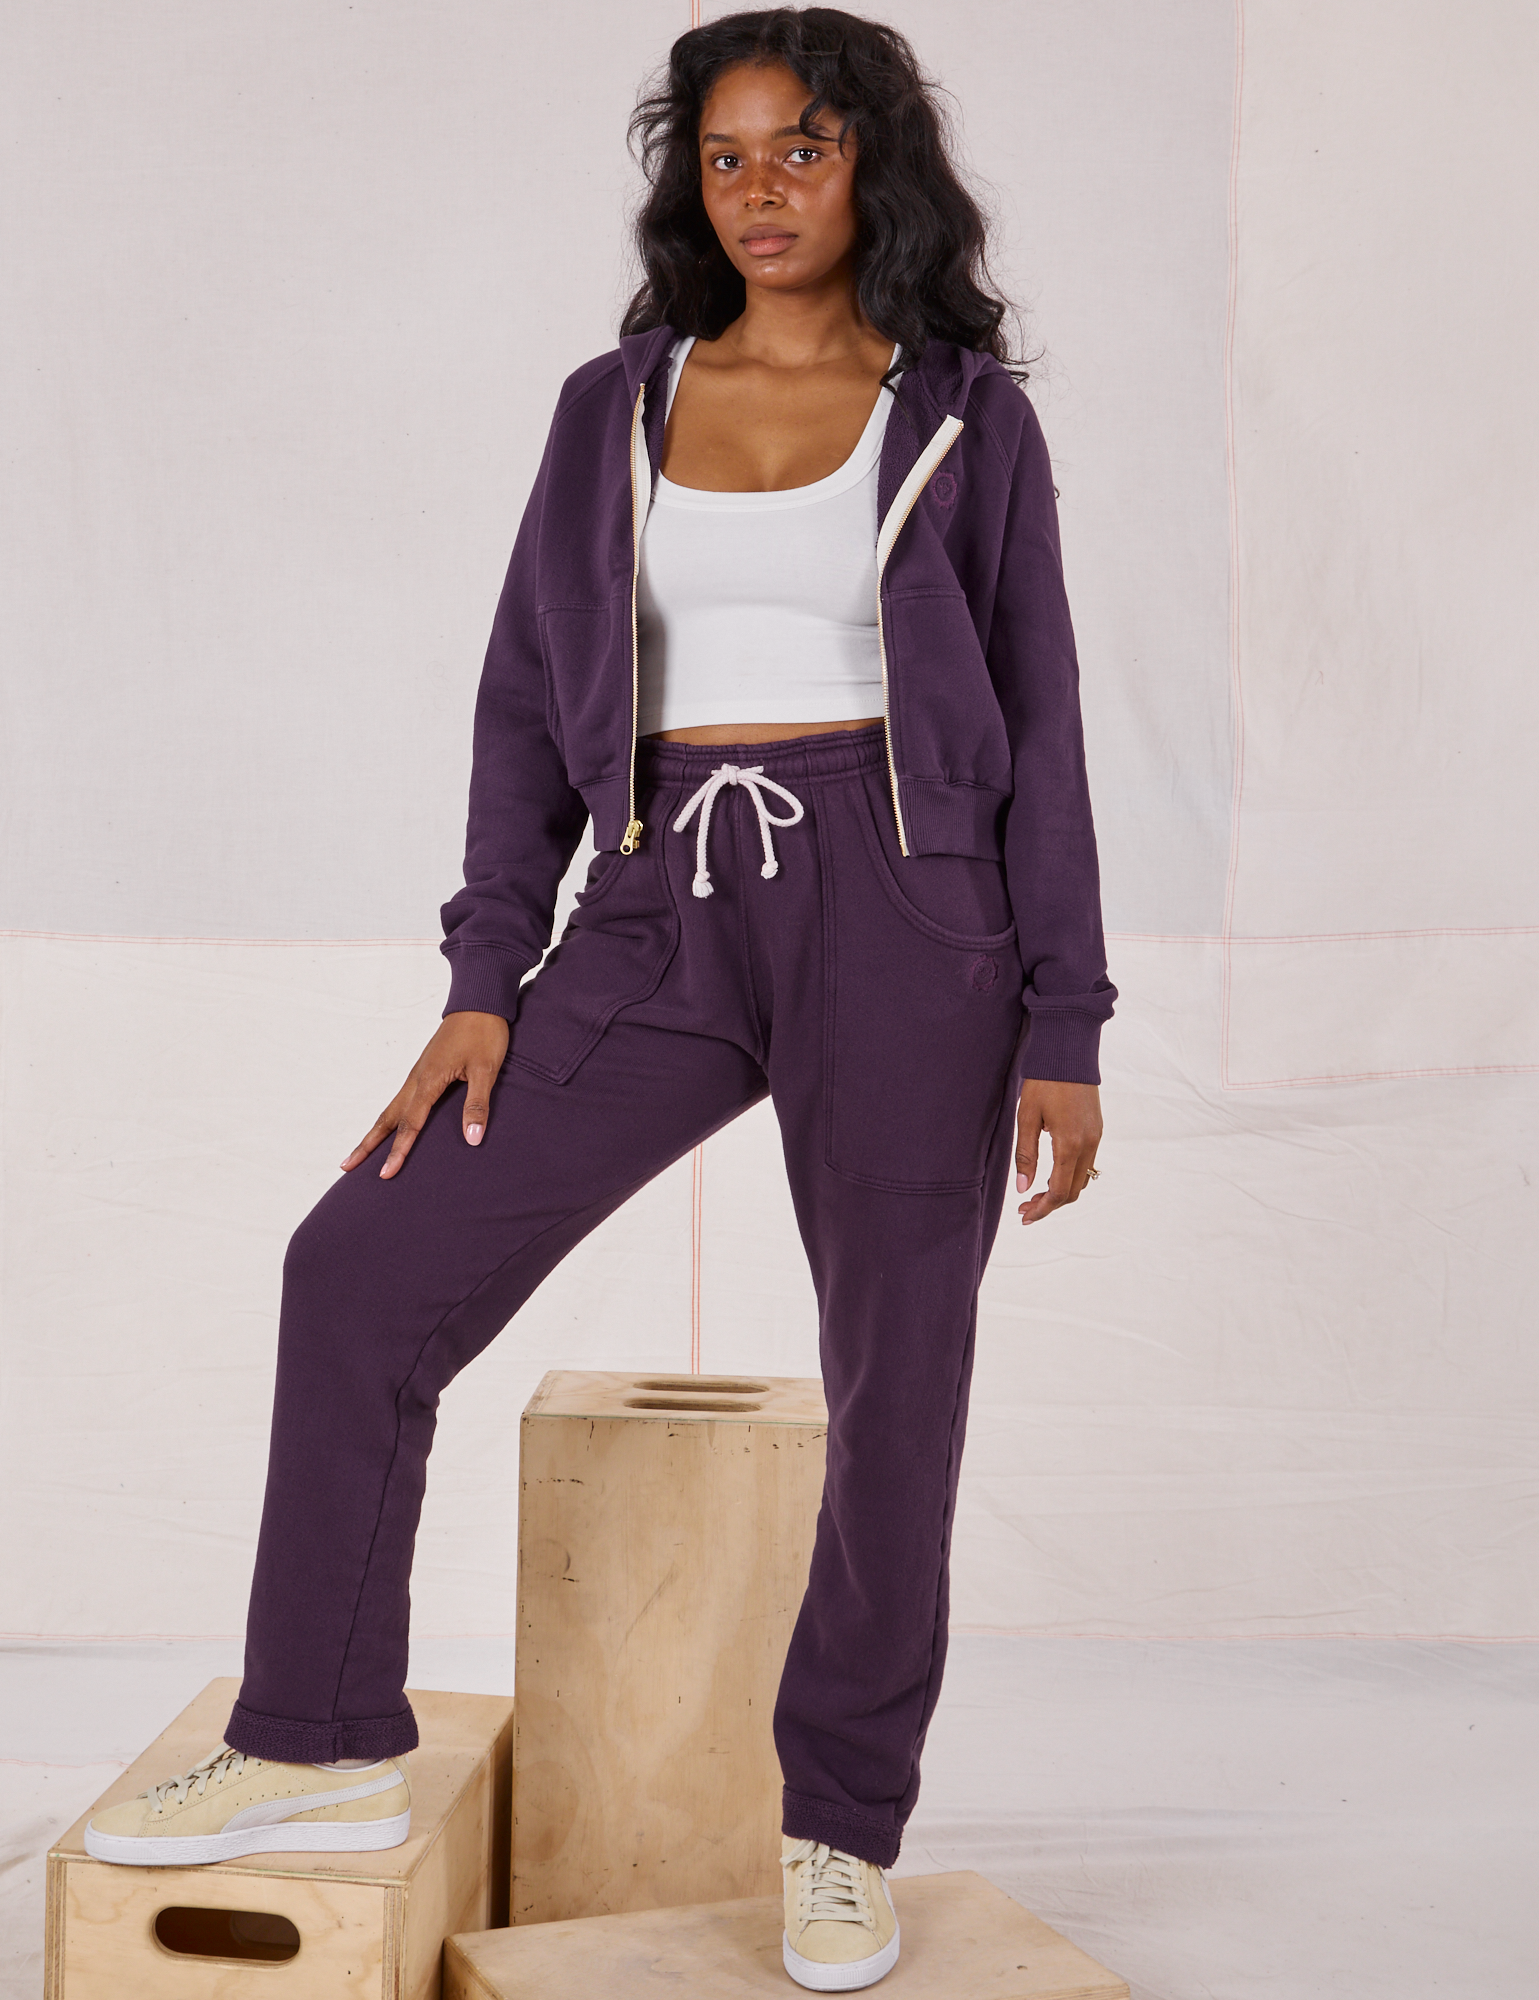 Kandia is 5'3" and wearing P Rolled Cuff Sweat Pants in Nebula Purple paired with matching Cropped Zip Hoodie and a vintage off-white Cropped Tank underneath